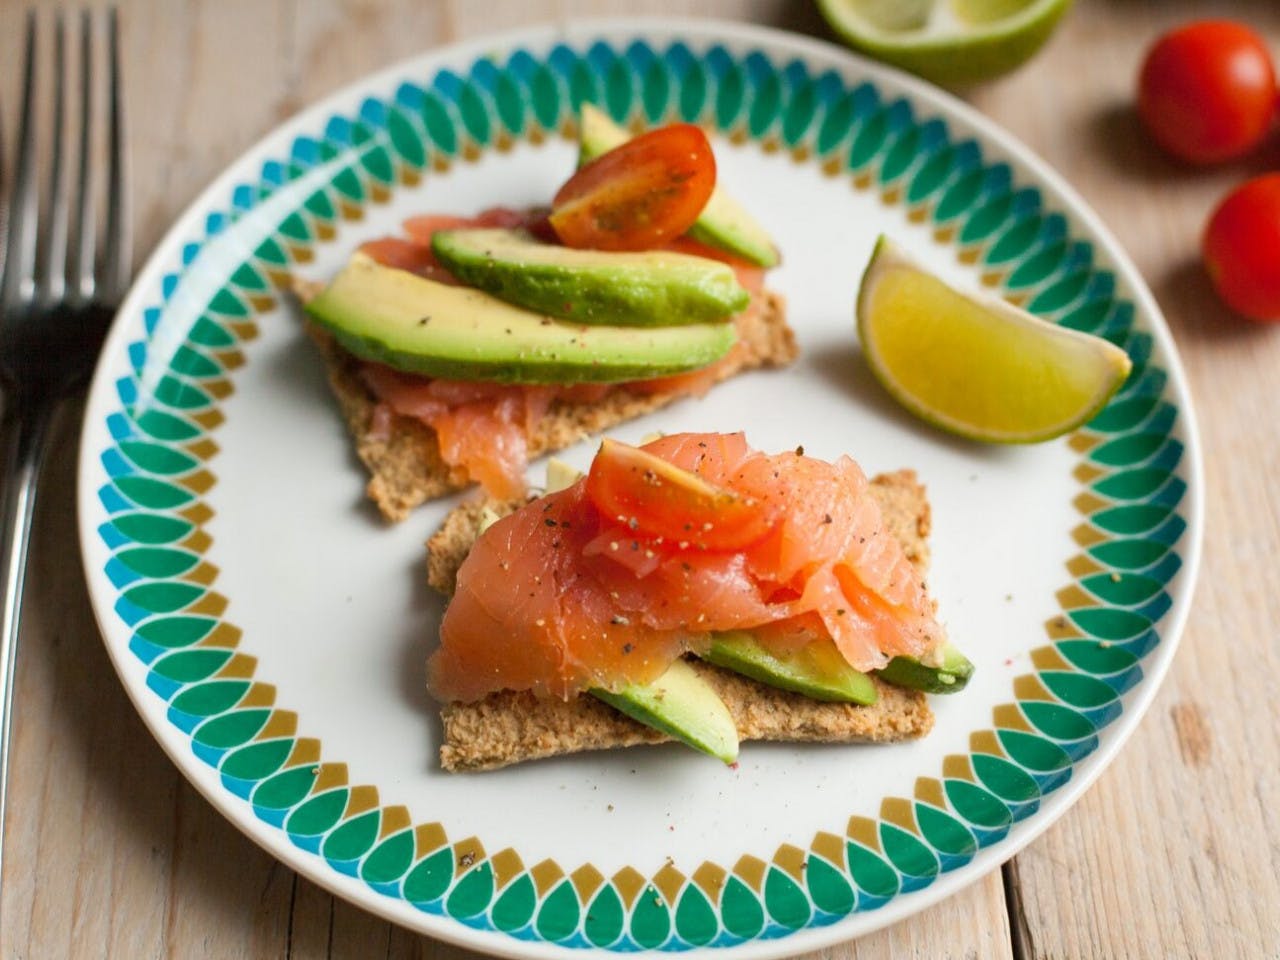 Mustard crackers with salmon and avocado